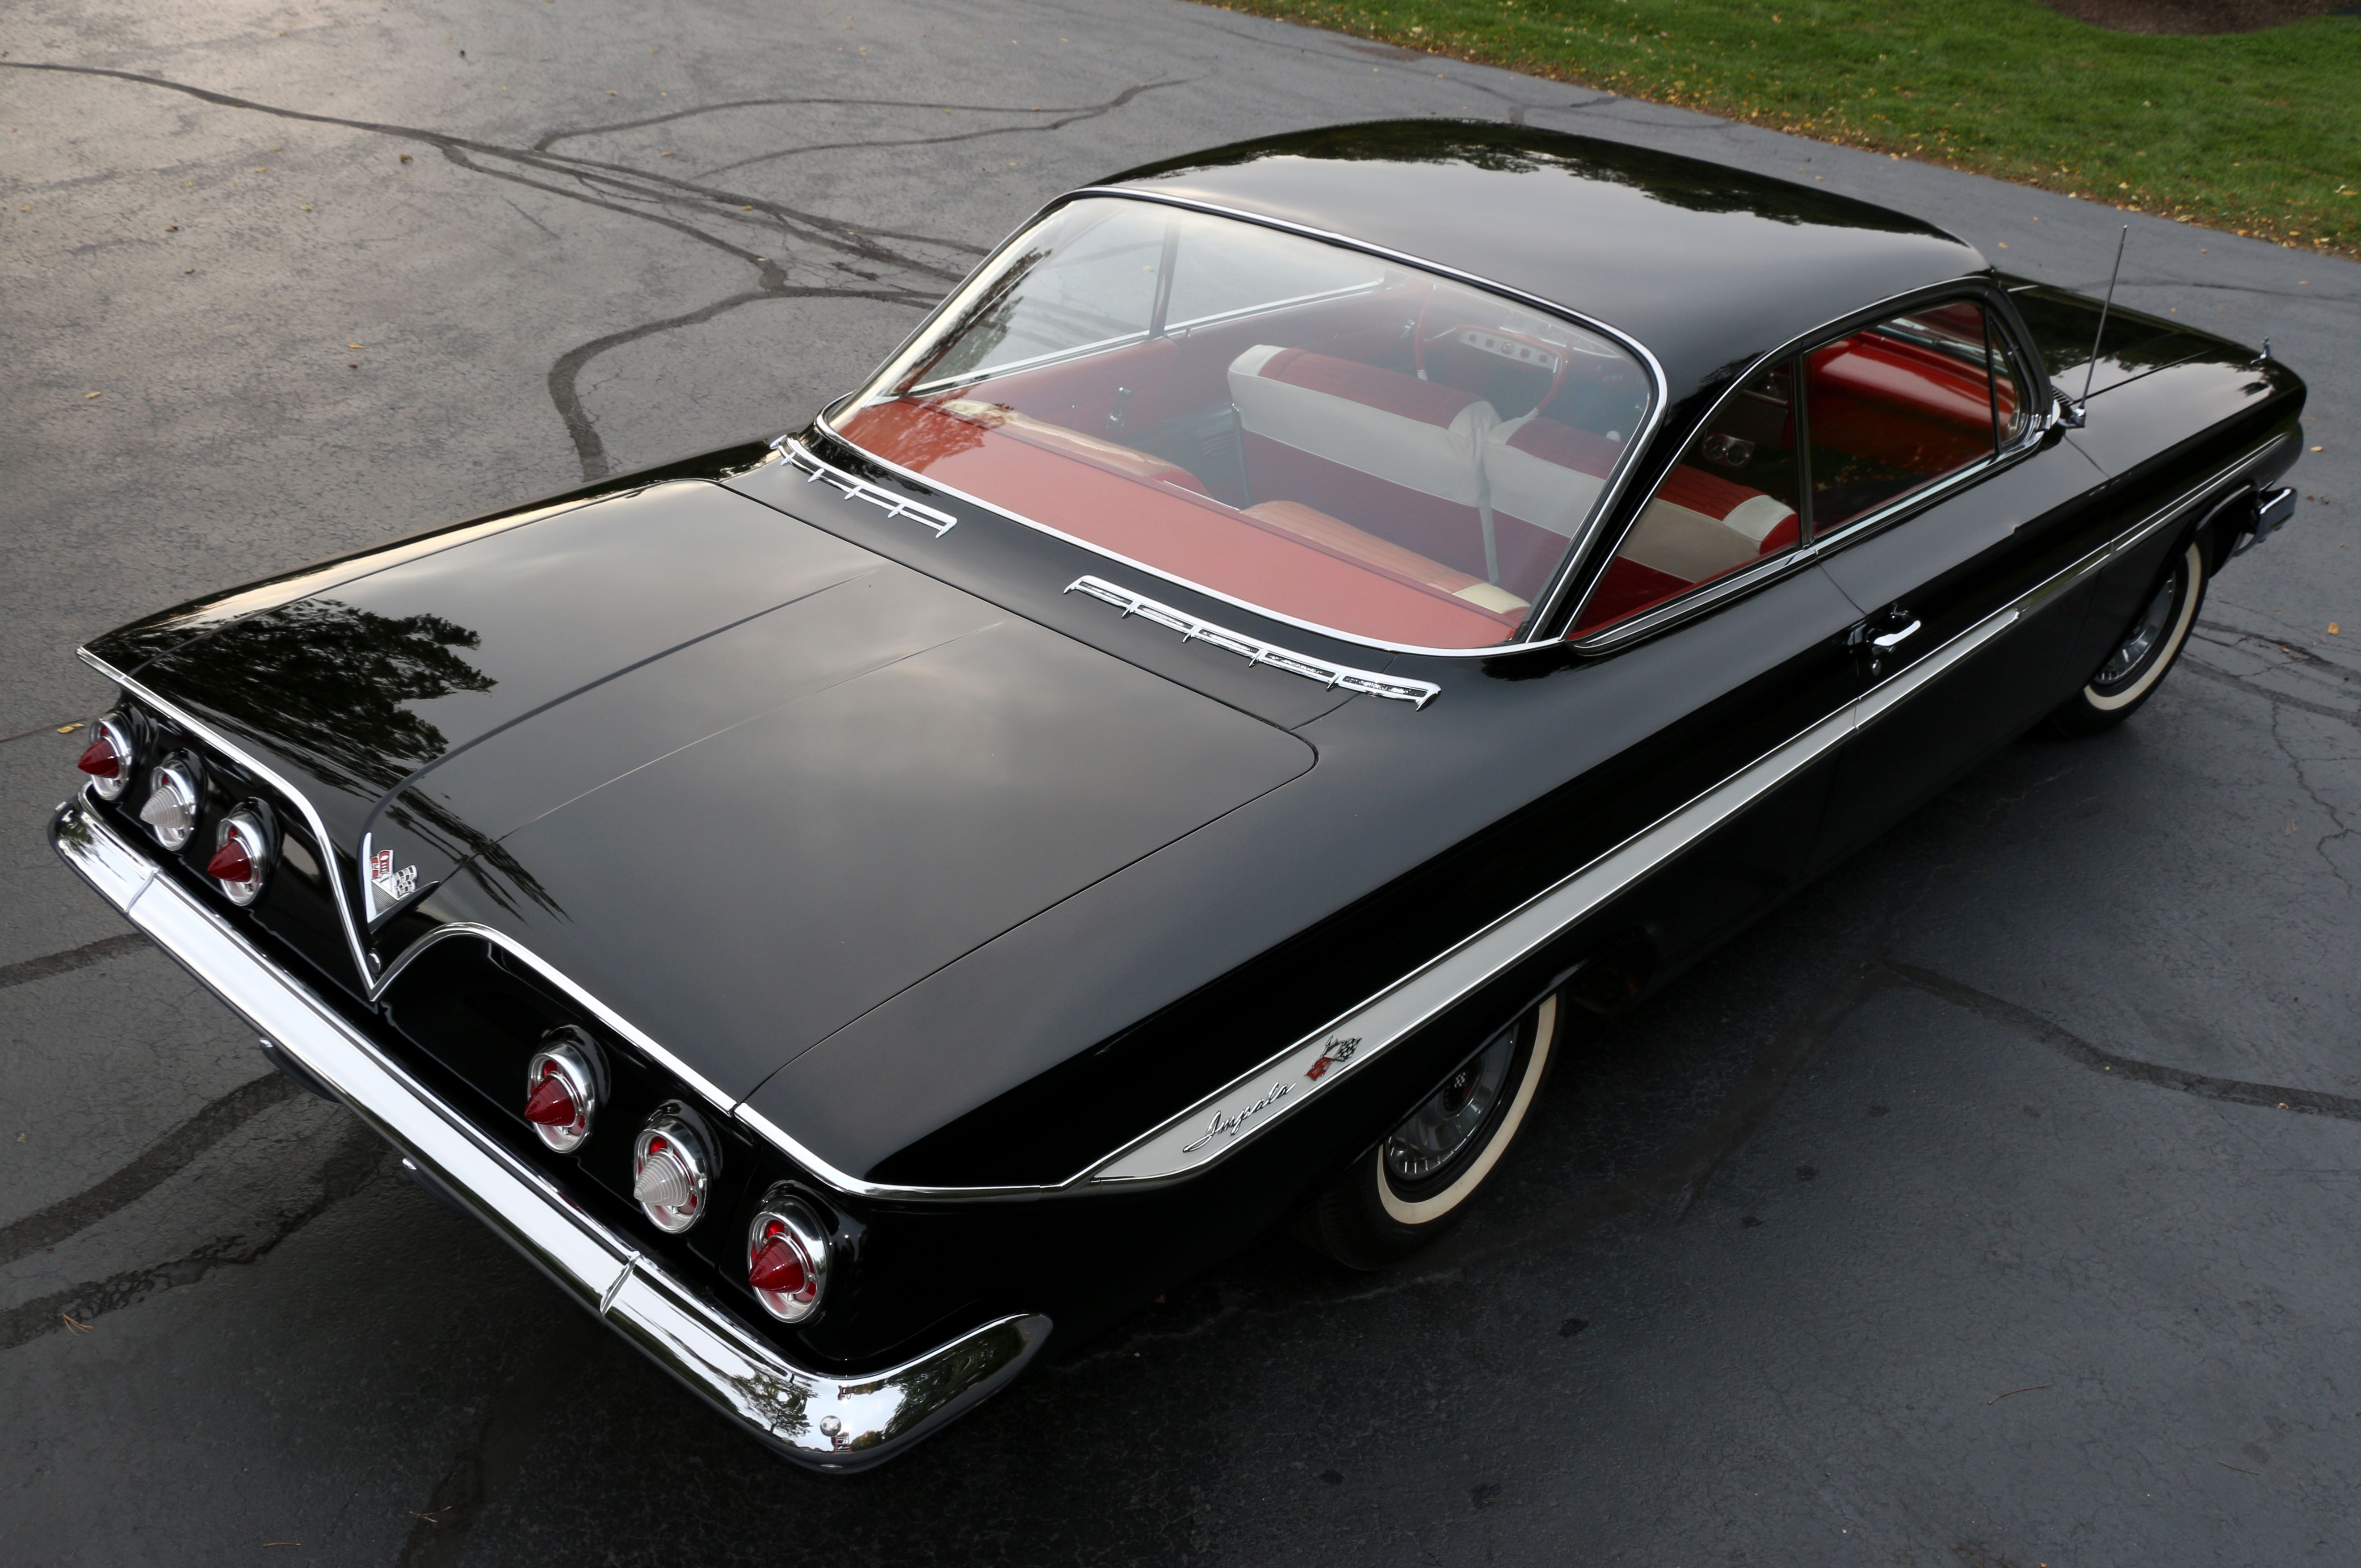 Curbside Classic: 1963 Chevrolet Impala SS 409